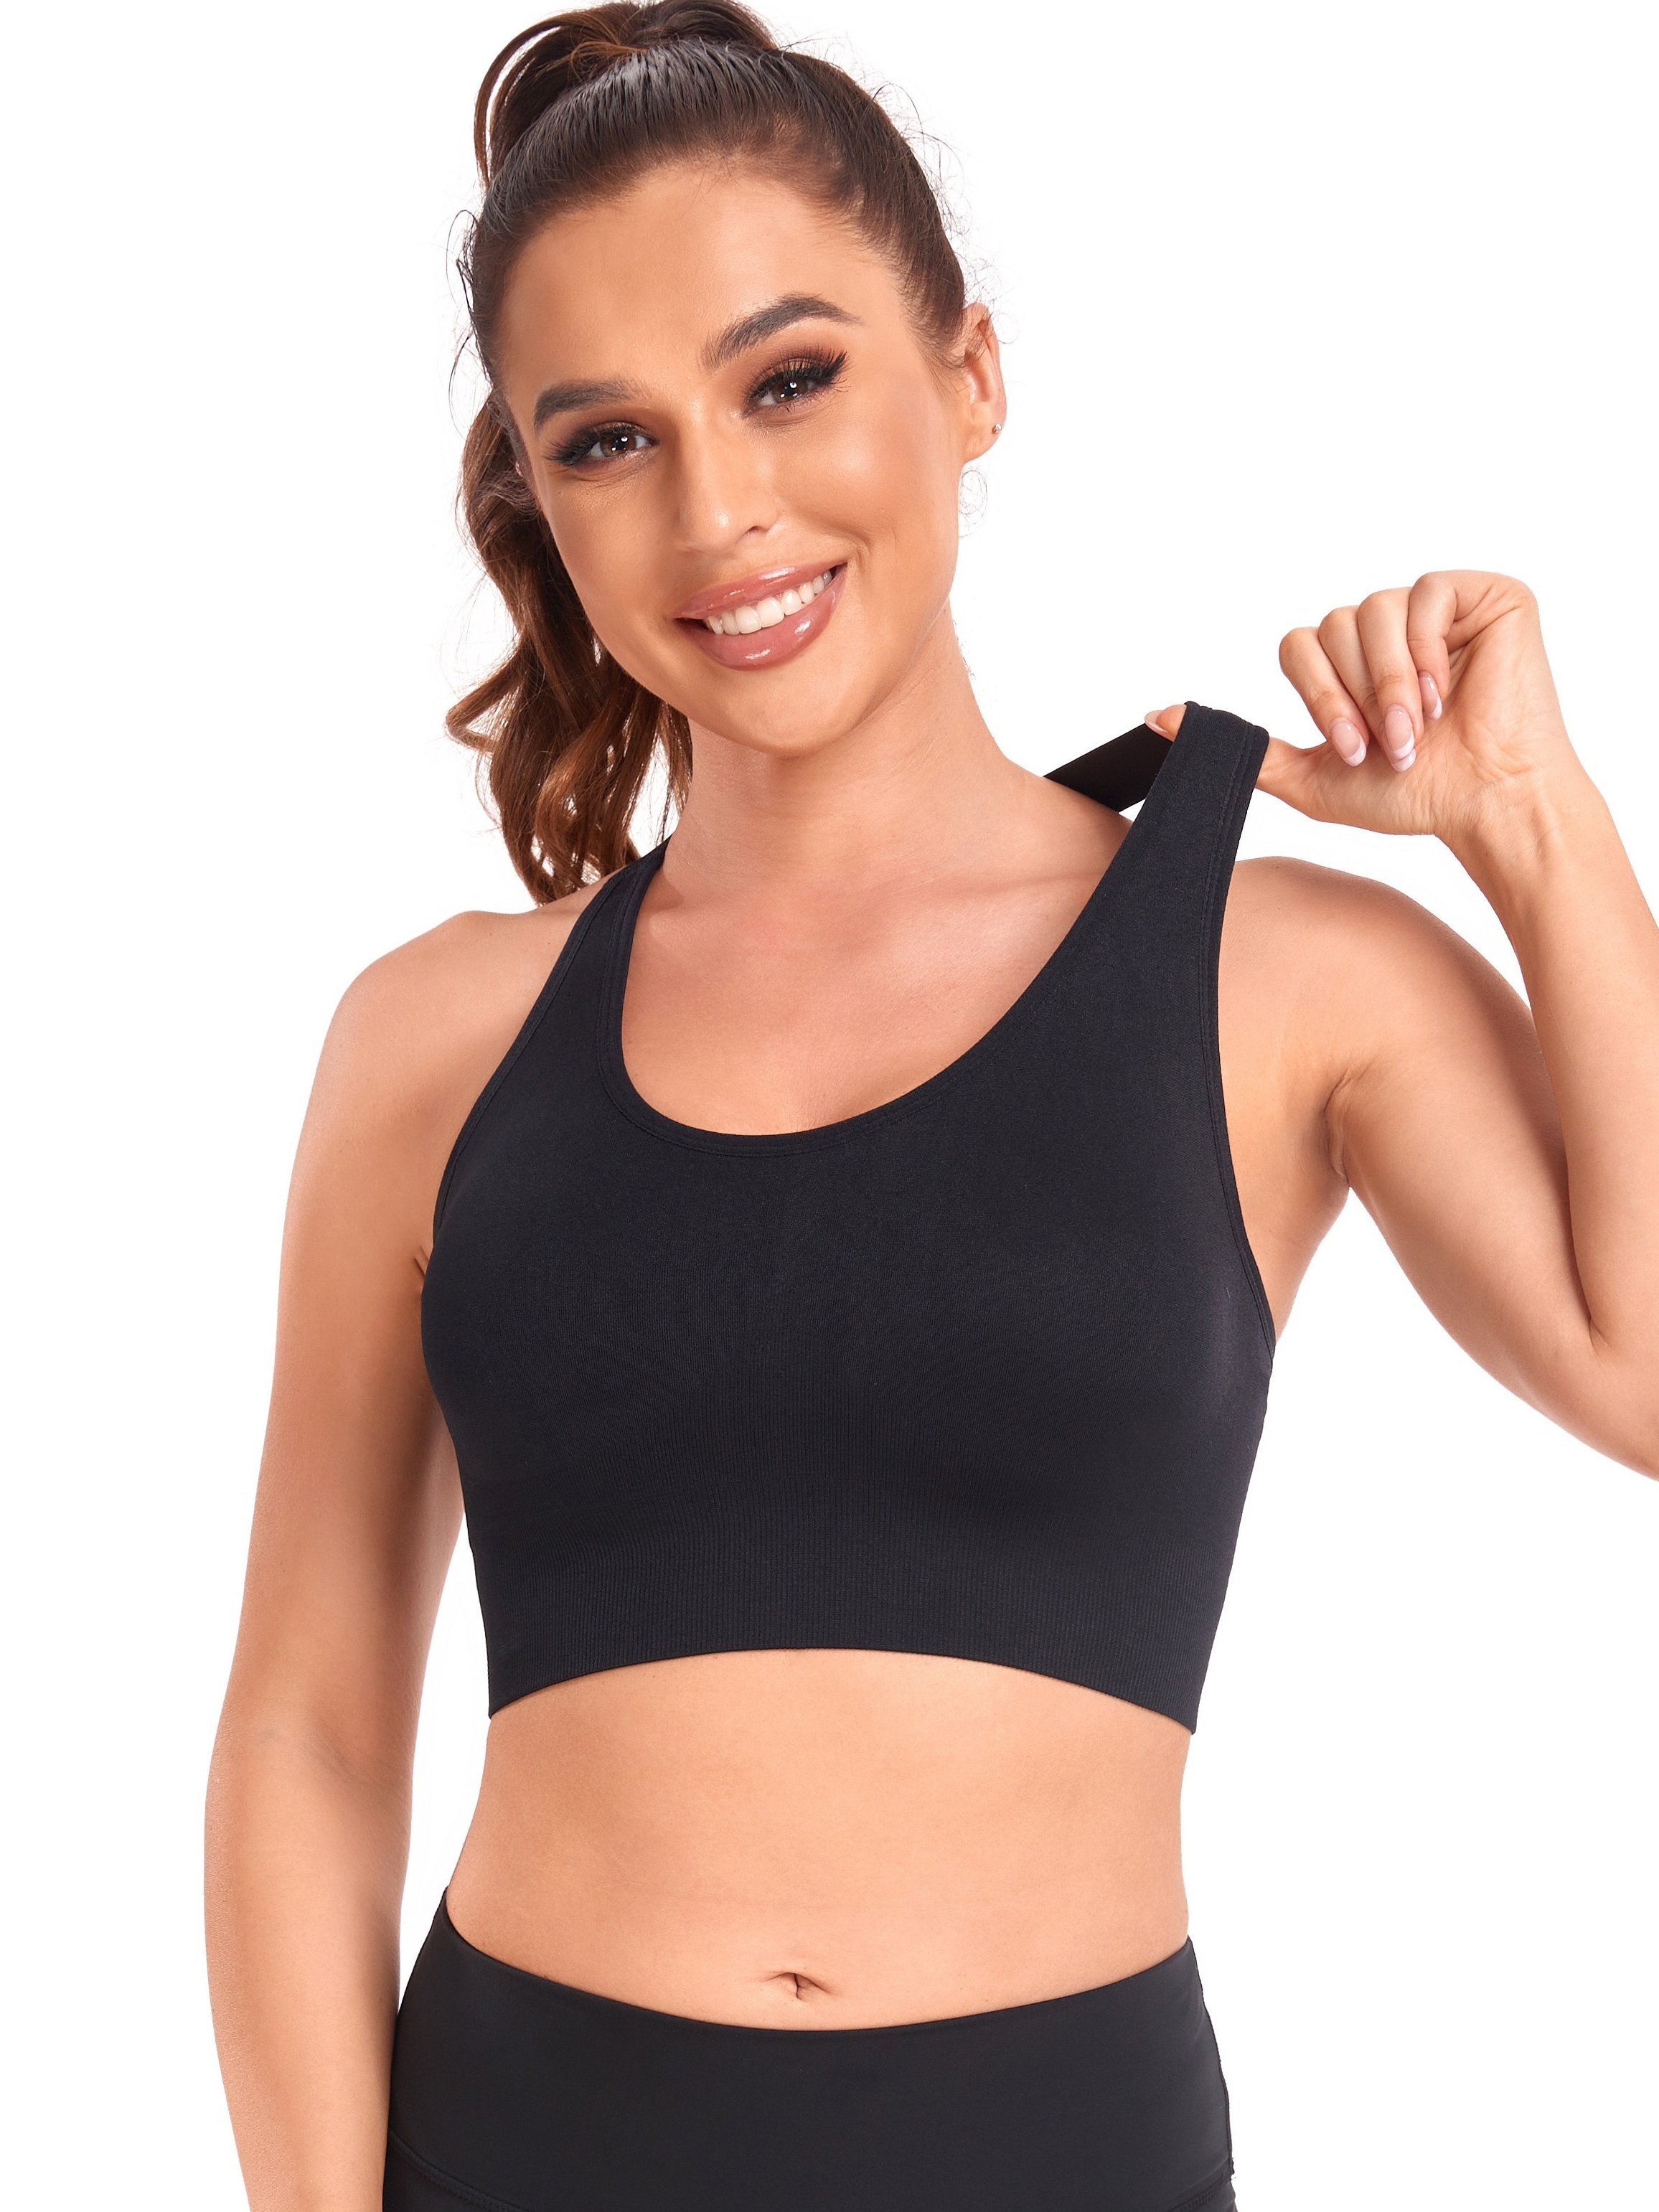 Yeacher Women Sports Bra Racer Back Strappy Hook-and-eye Closure Removable  Padded Athletic Workout Yoga Crop Tops